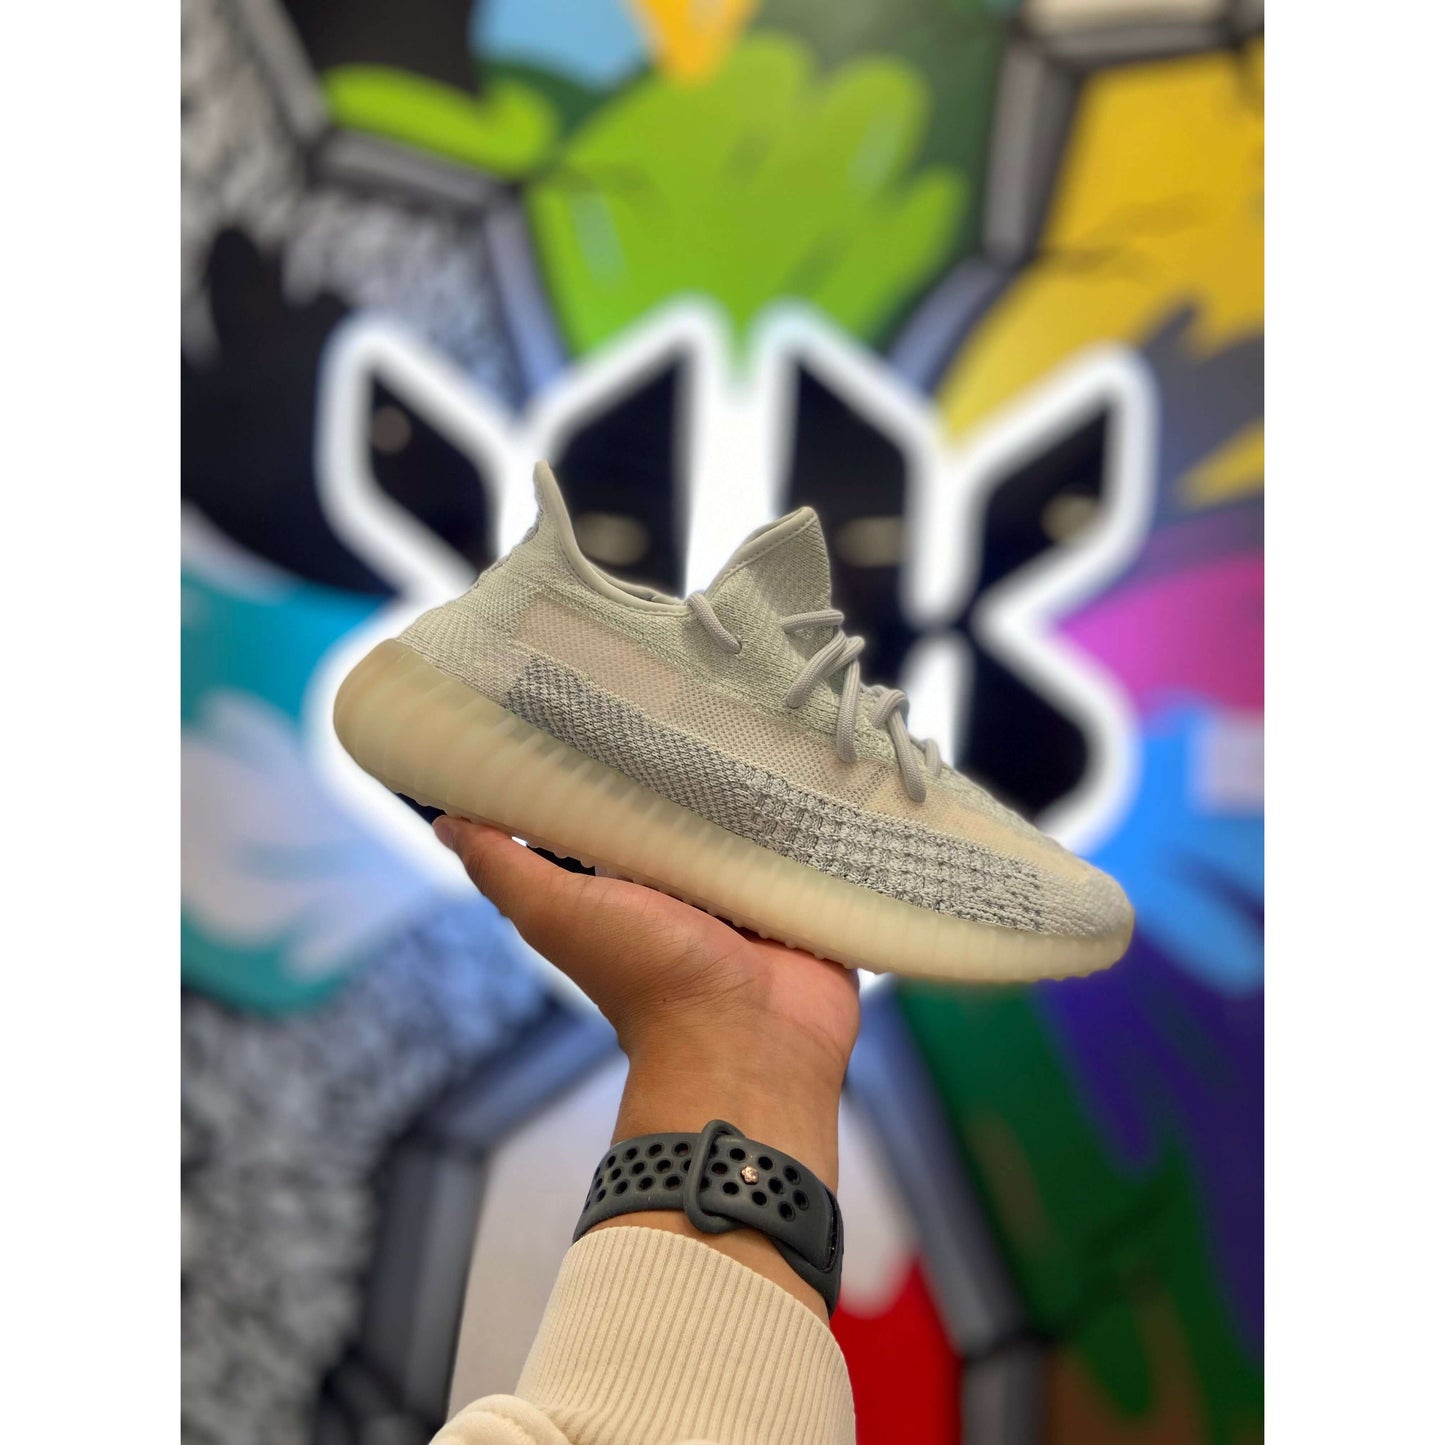 Adidas Yeezy Boost 350 V2 Cloud White (Reflective) from Yeezy